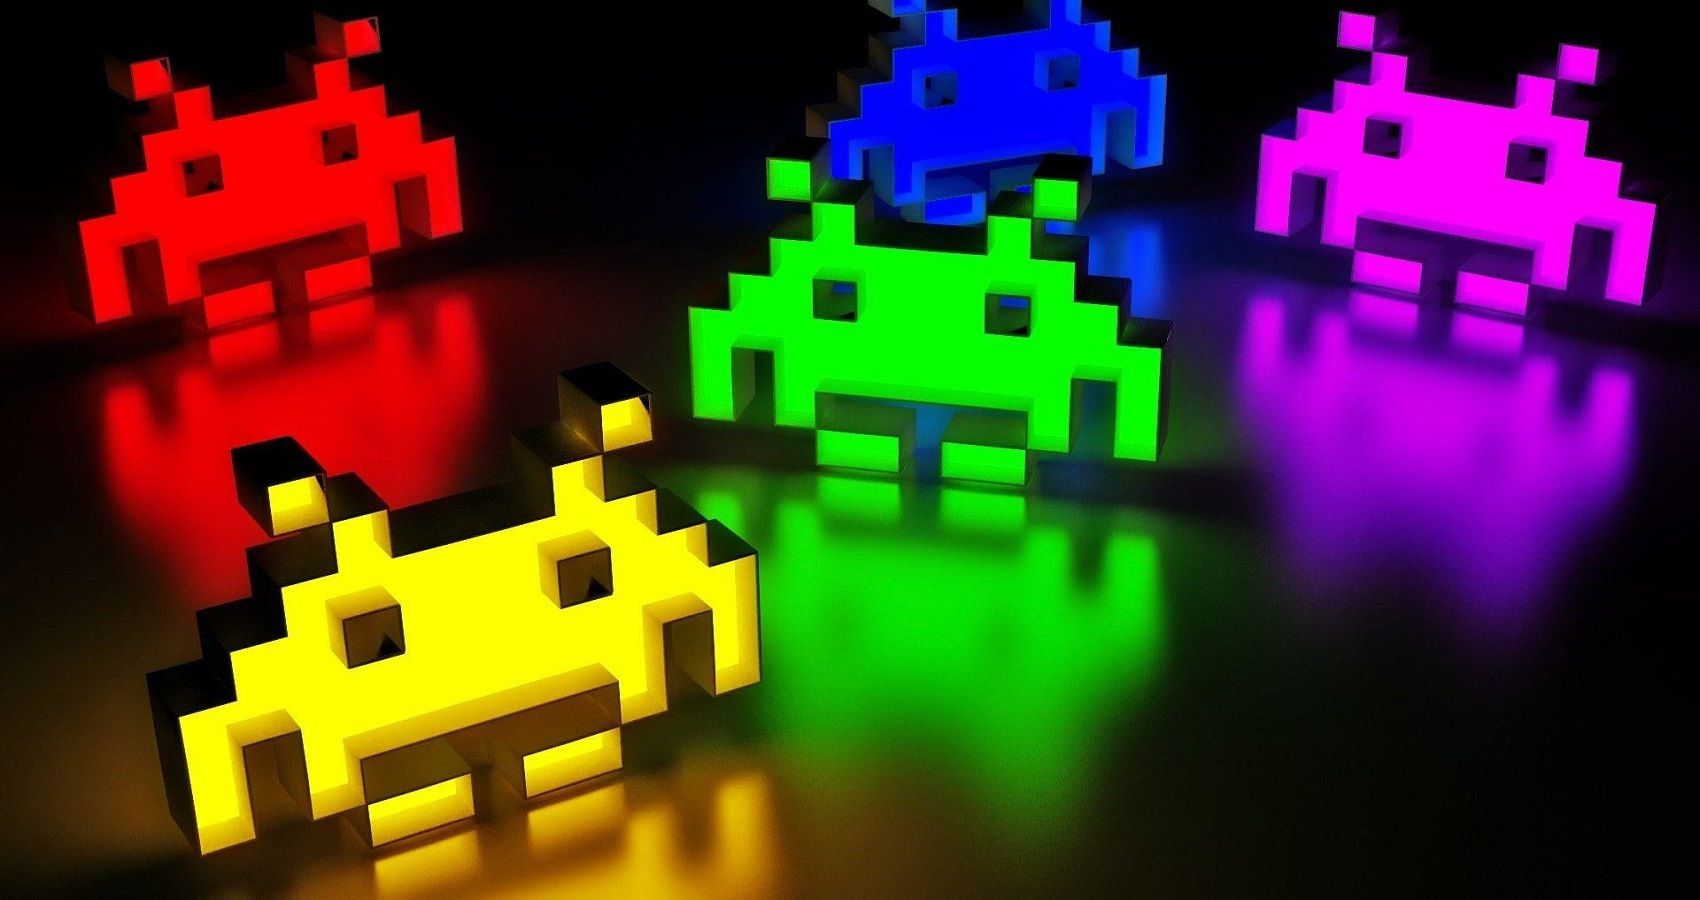 Space Invaders: 15 Mind-Blowing Facts About the Arcade Classic